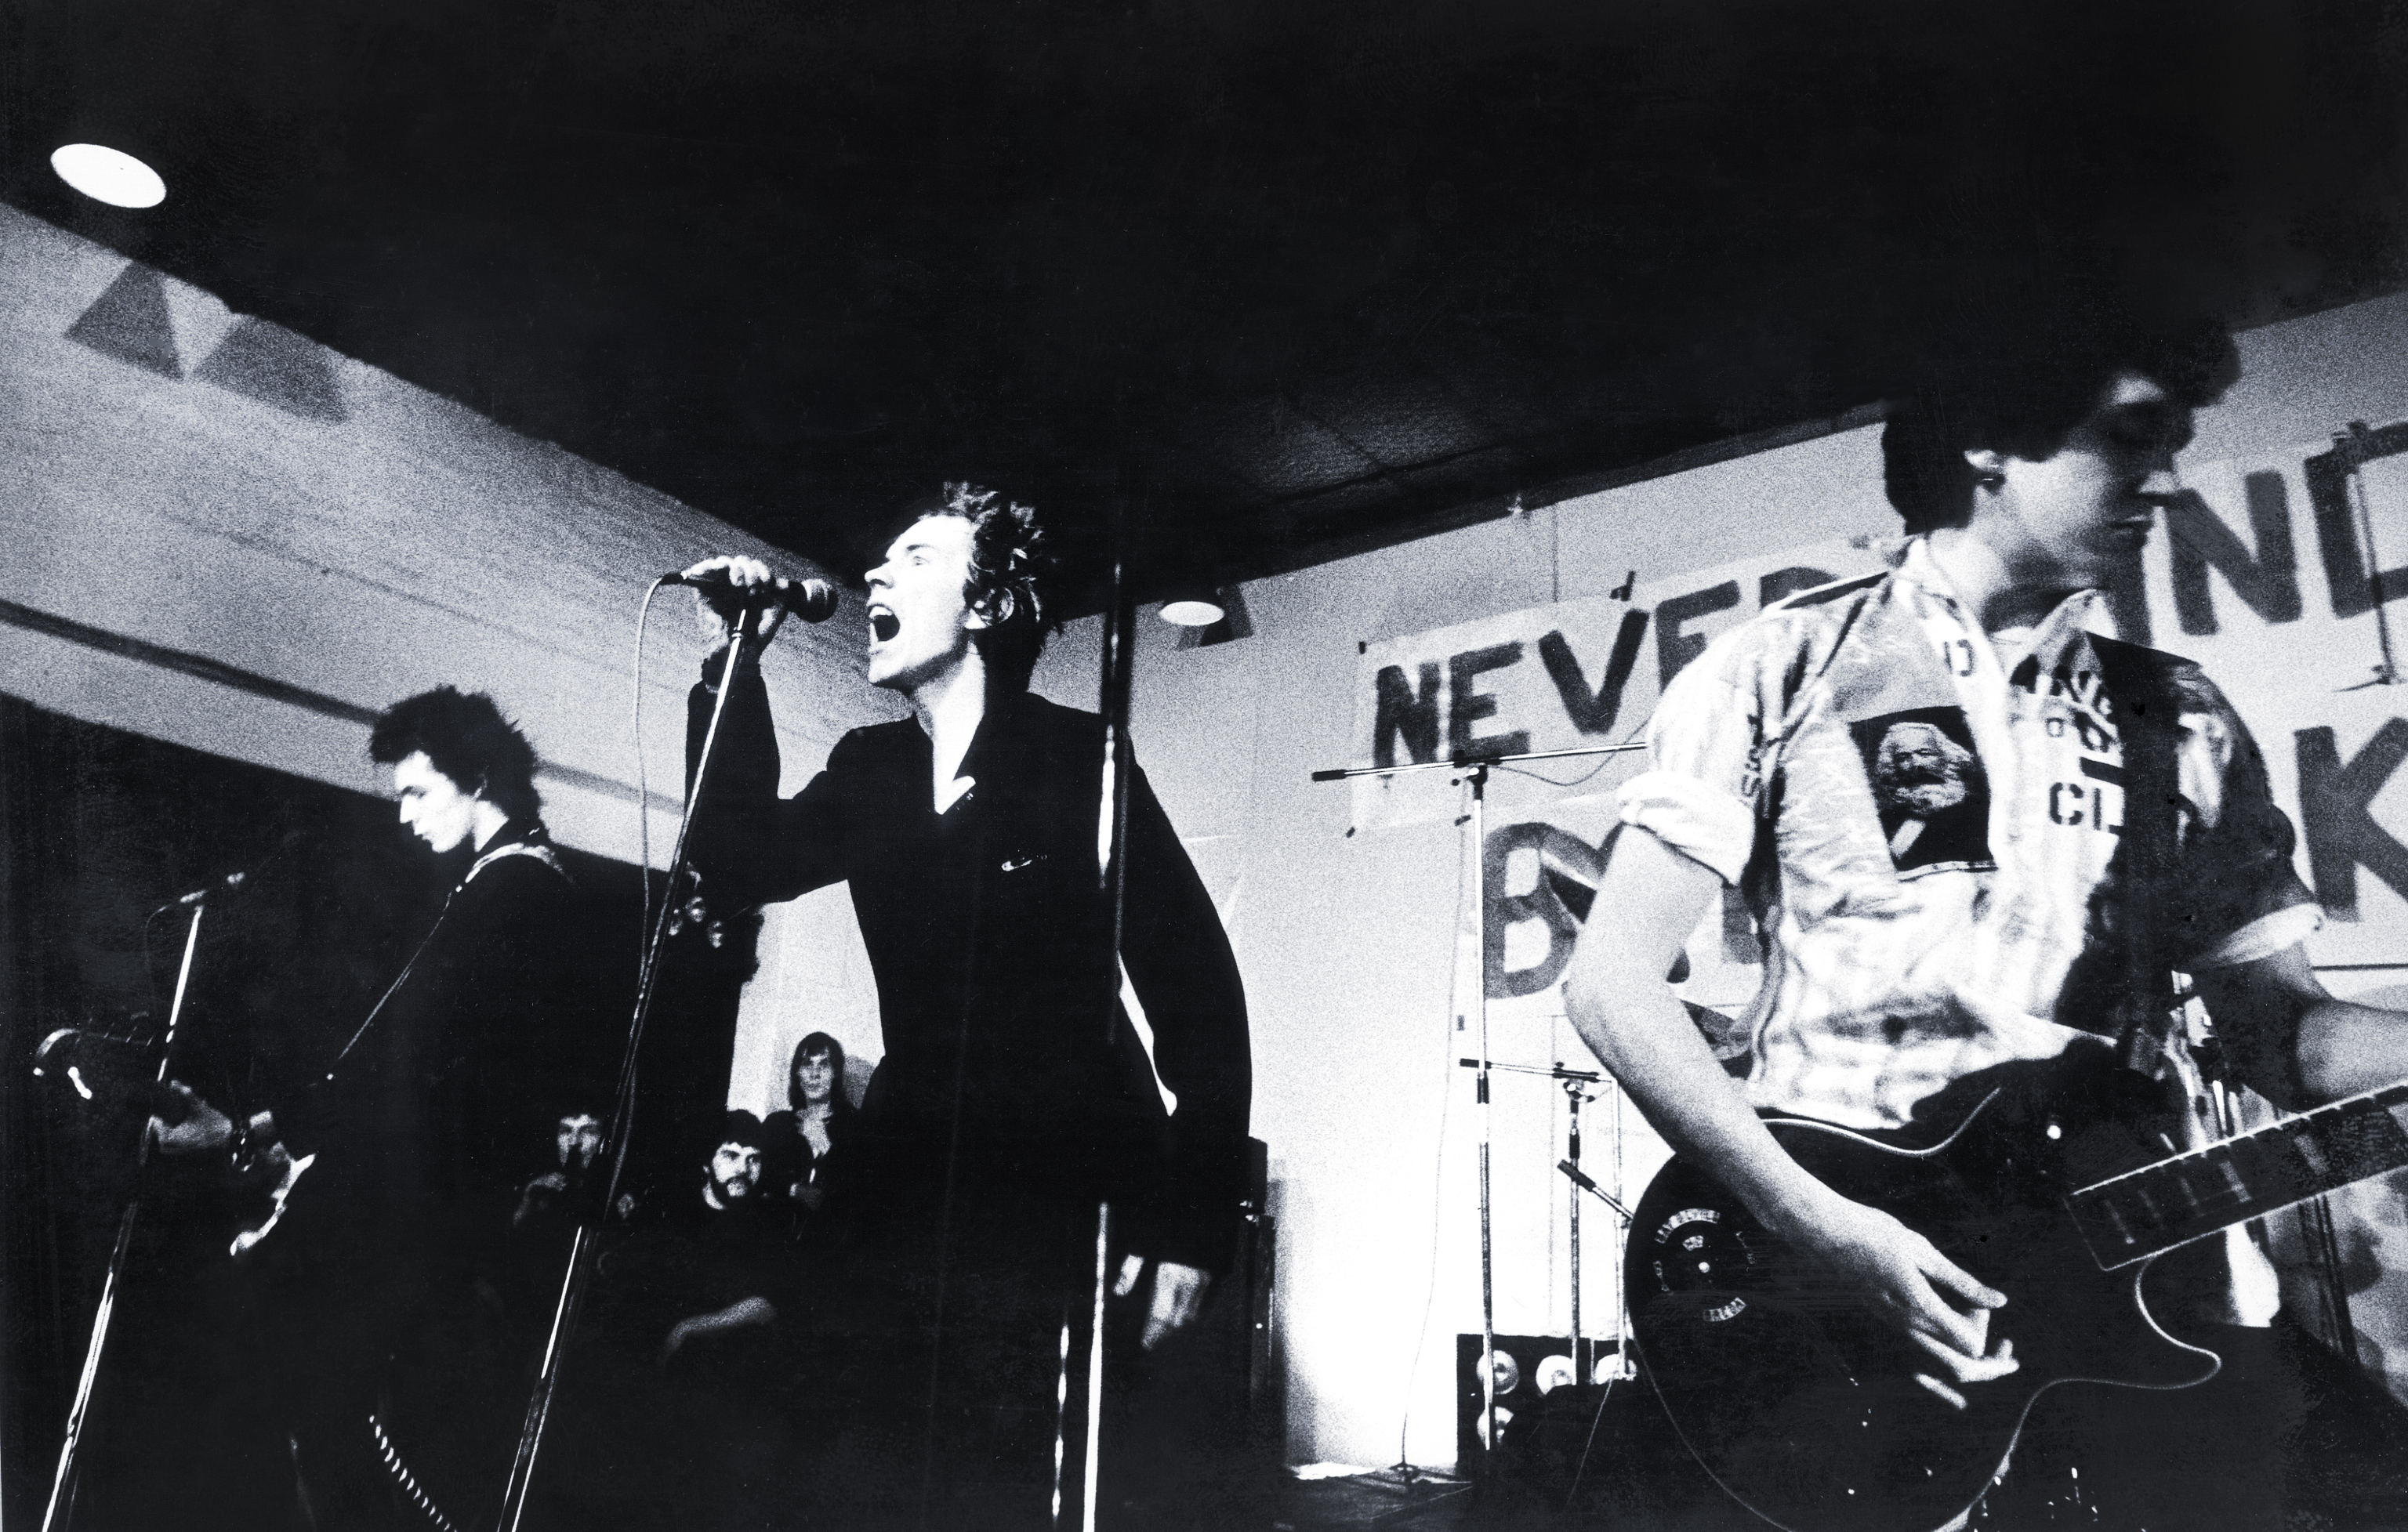 Johnny Rotten, Sid Vicious and Steve Jones at a concert in December 1977.